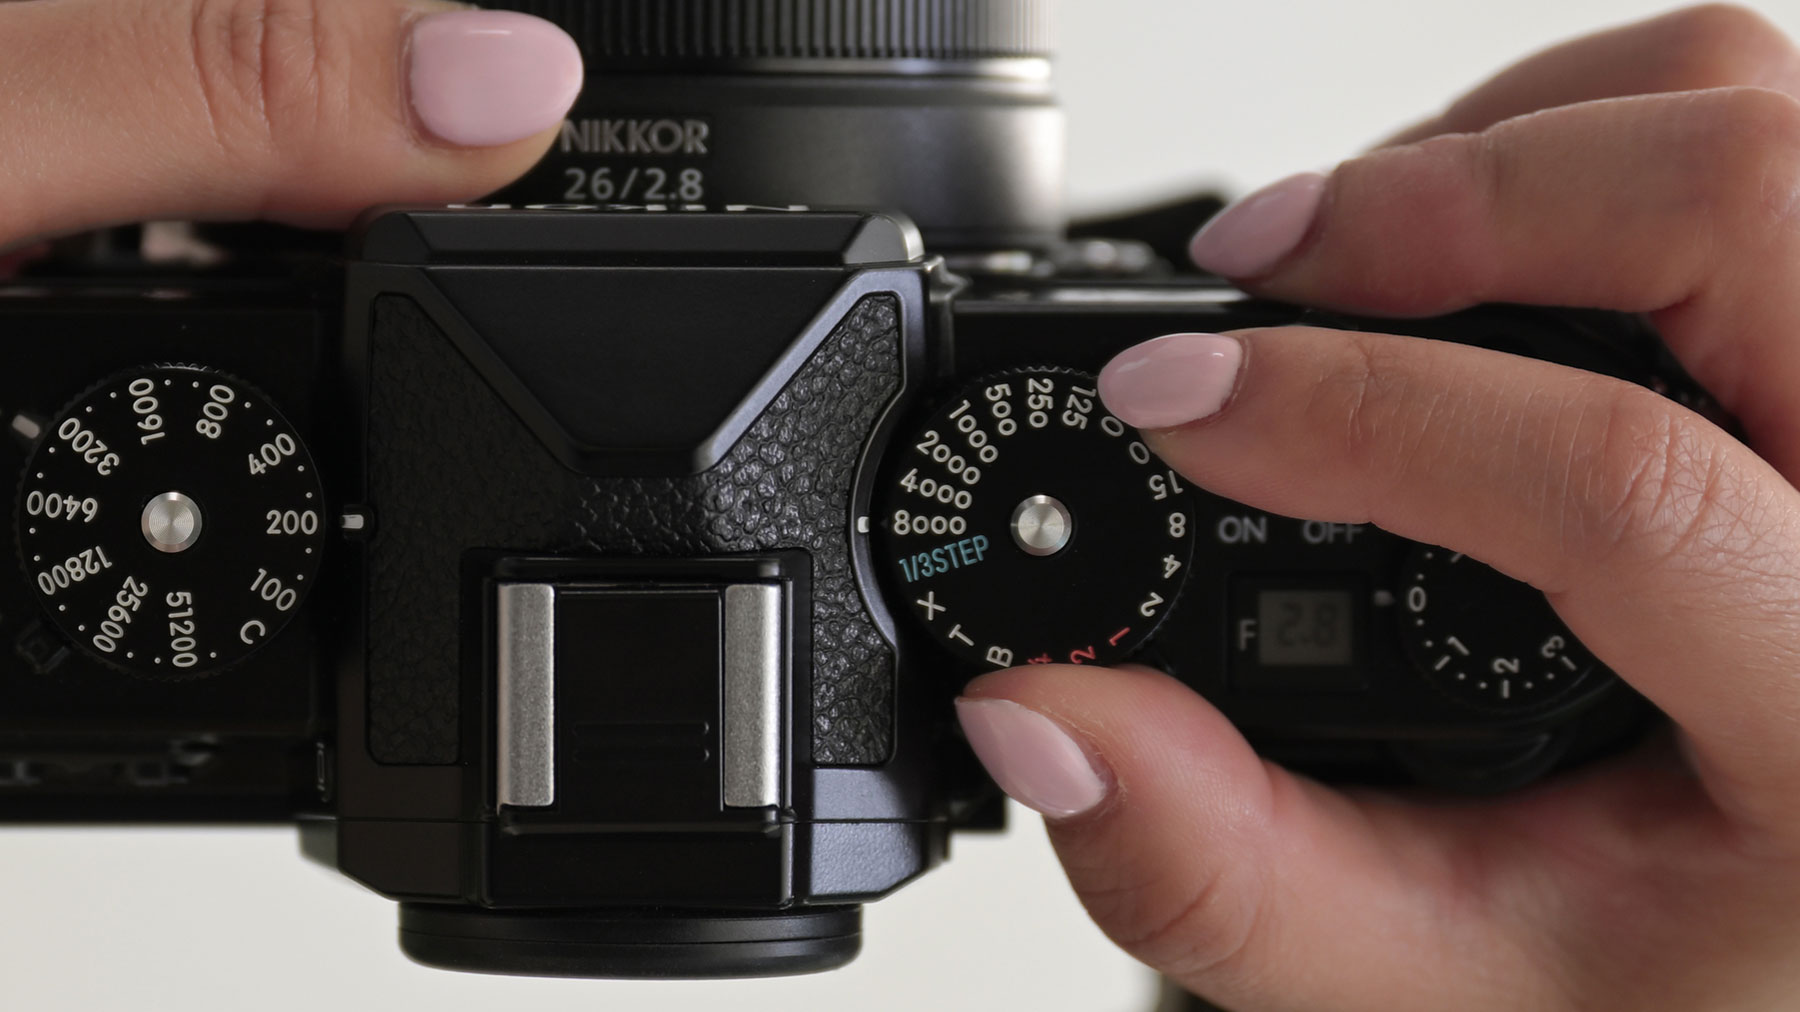 Photo of a pair of hands holding the Z f camera, adjusting the shutter speed dial